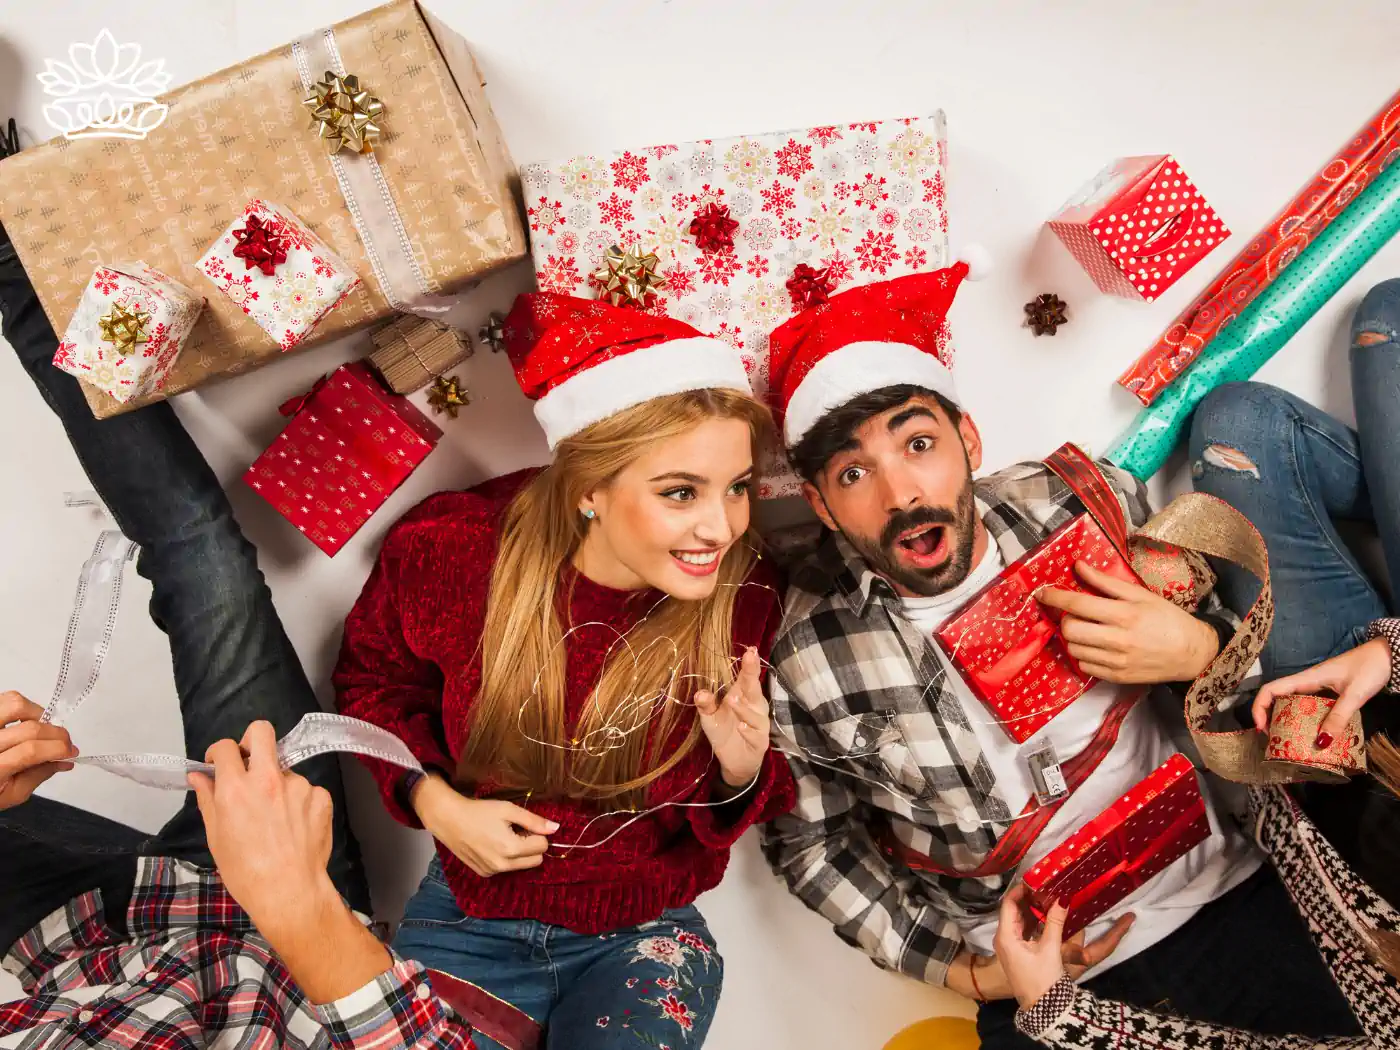 A group of friends wrapping gifts together on the floor, surrounded by brightly colored gift boxes, wrapping paper, and ribbons, part of the Festive Season Gift Boxes Collection. Delivered with Heart by Fabulous Flowers and Gifts.